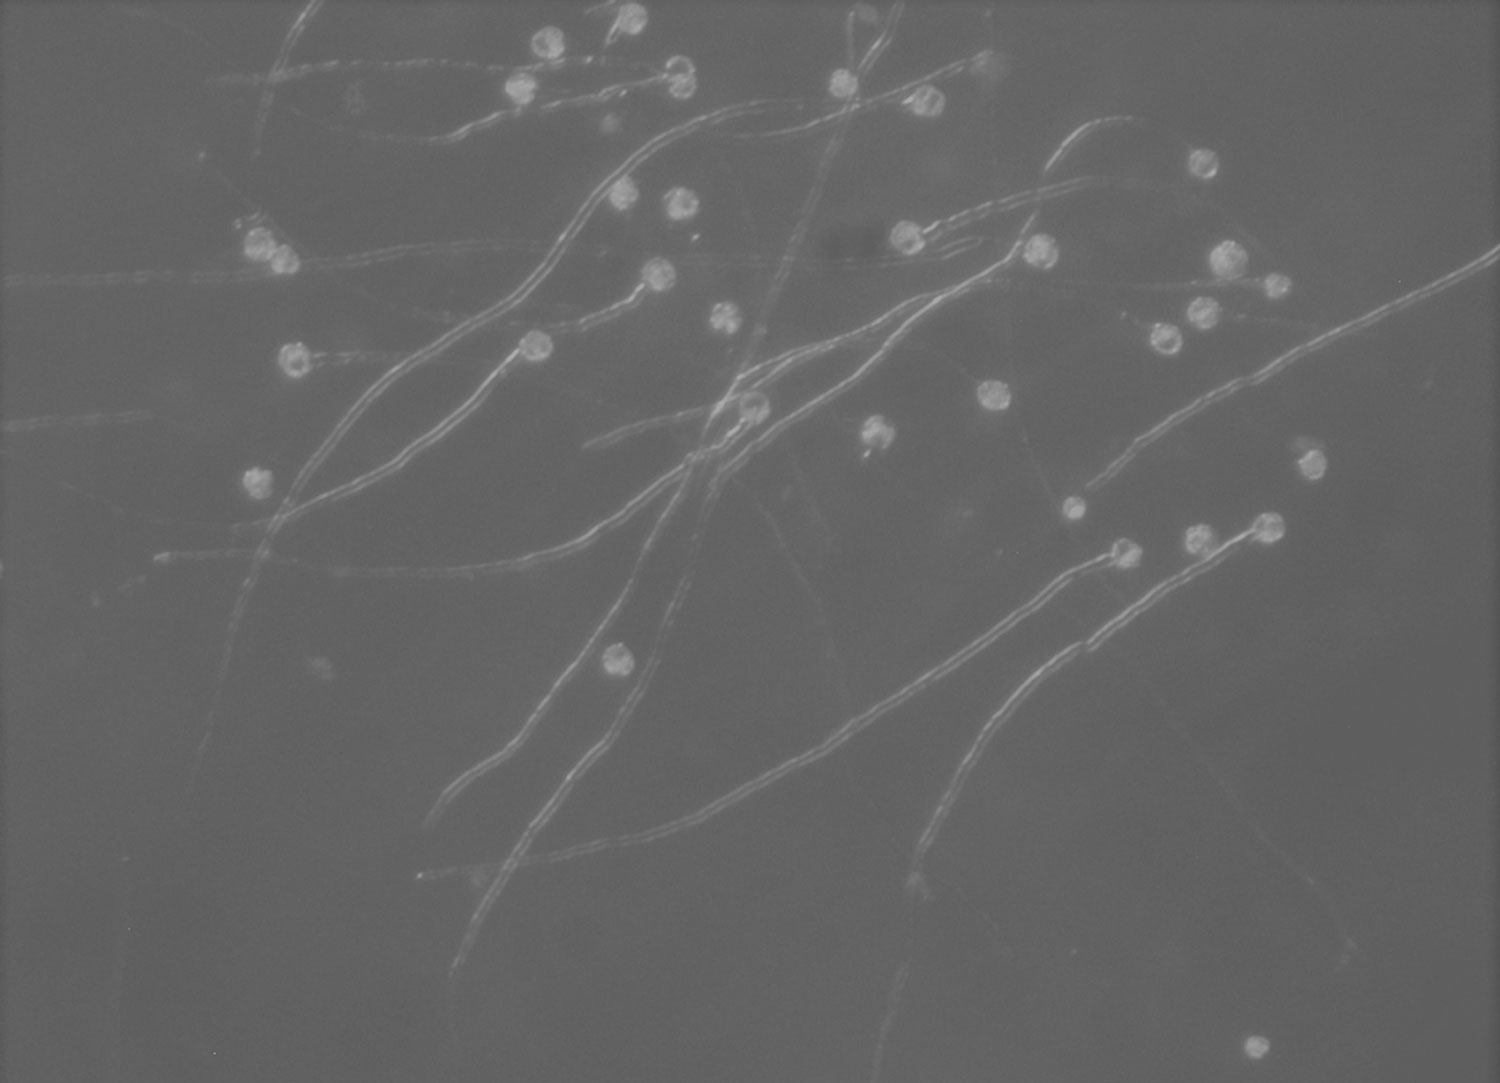 Microscopy image of pollen grains with tubes attached